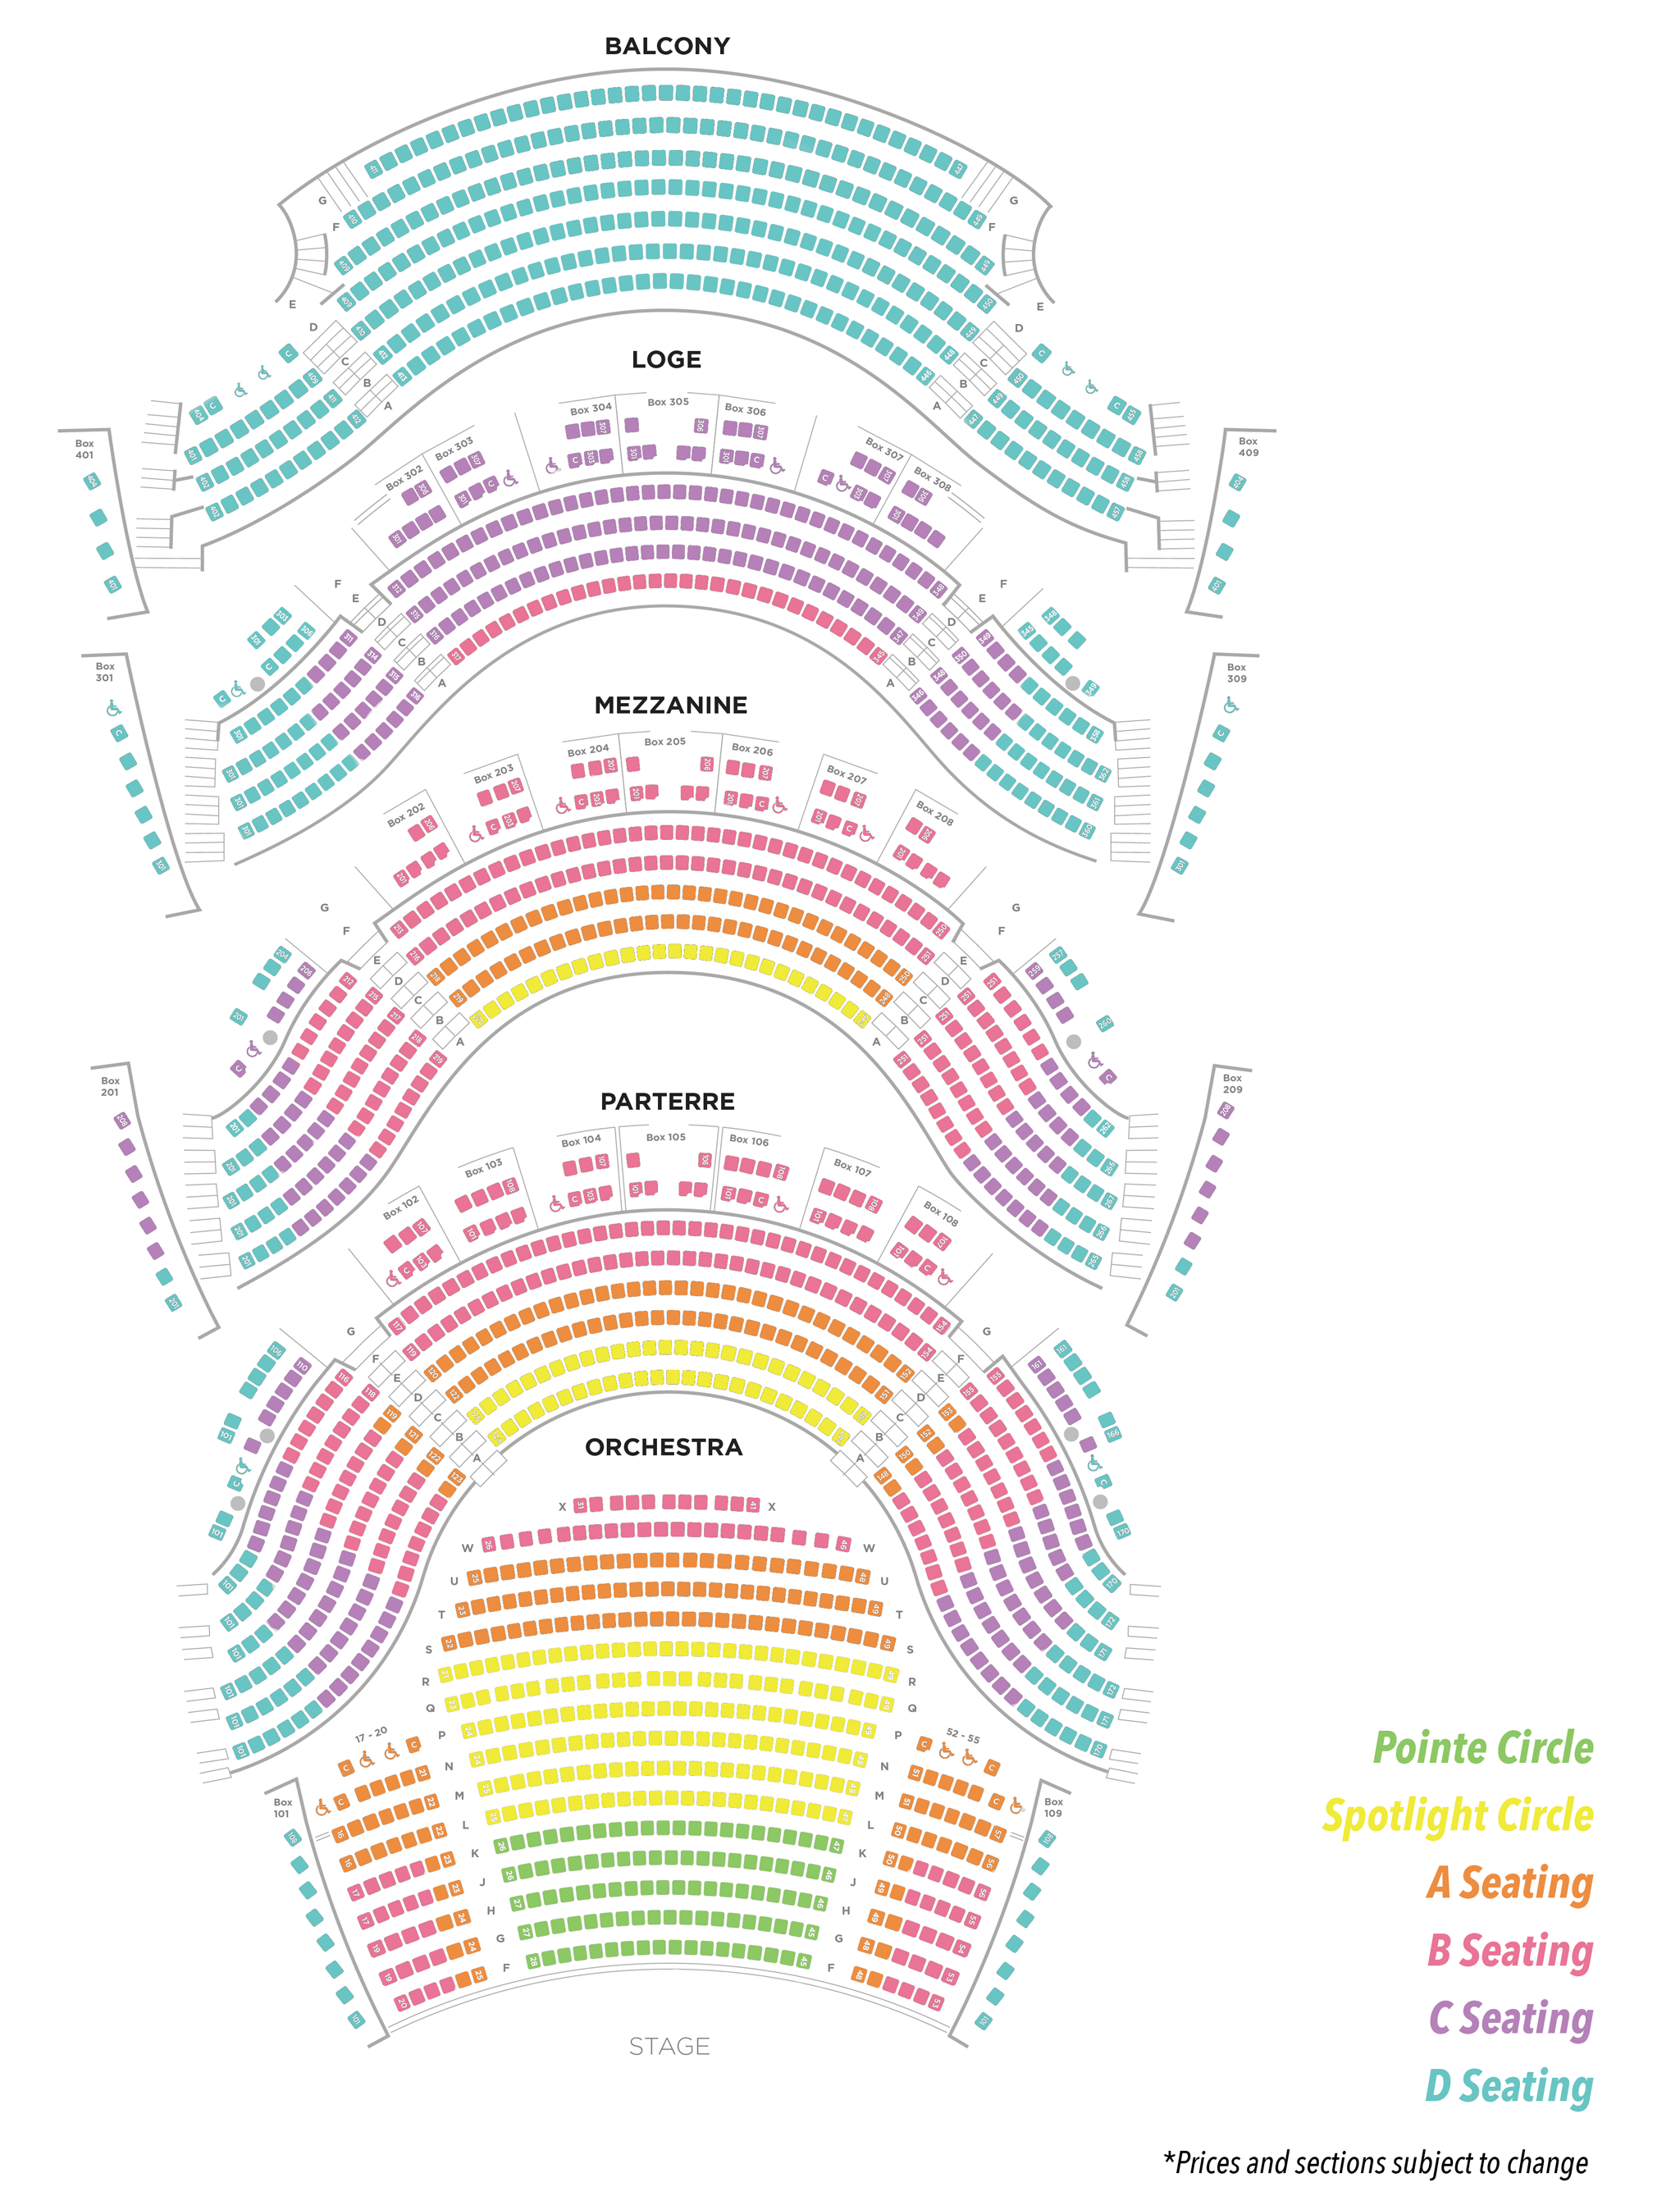 View Seating Map.